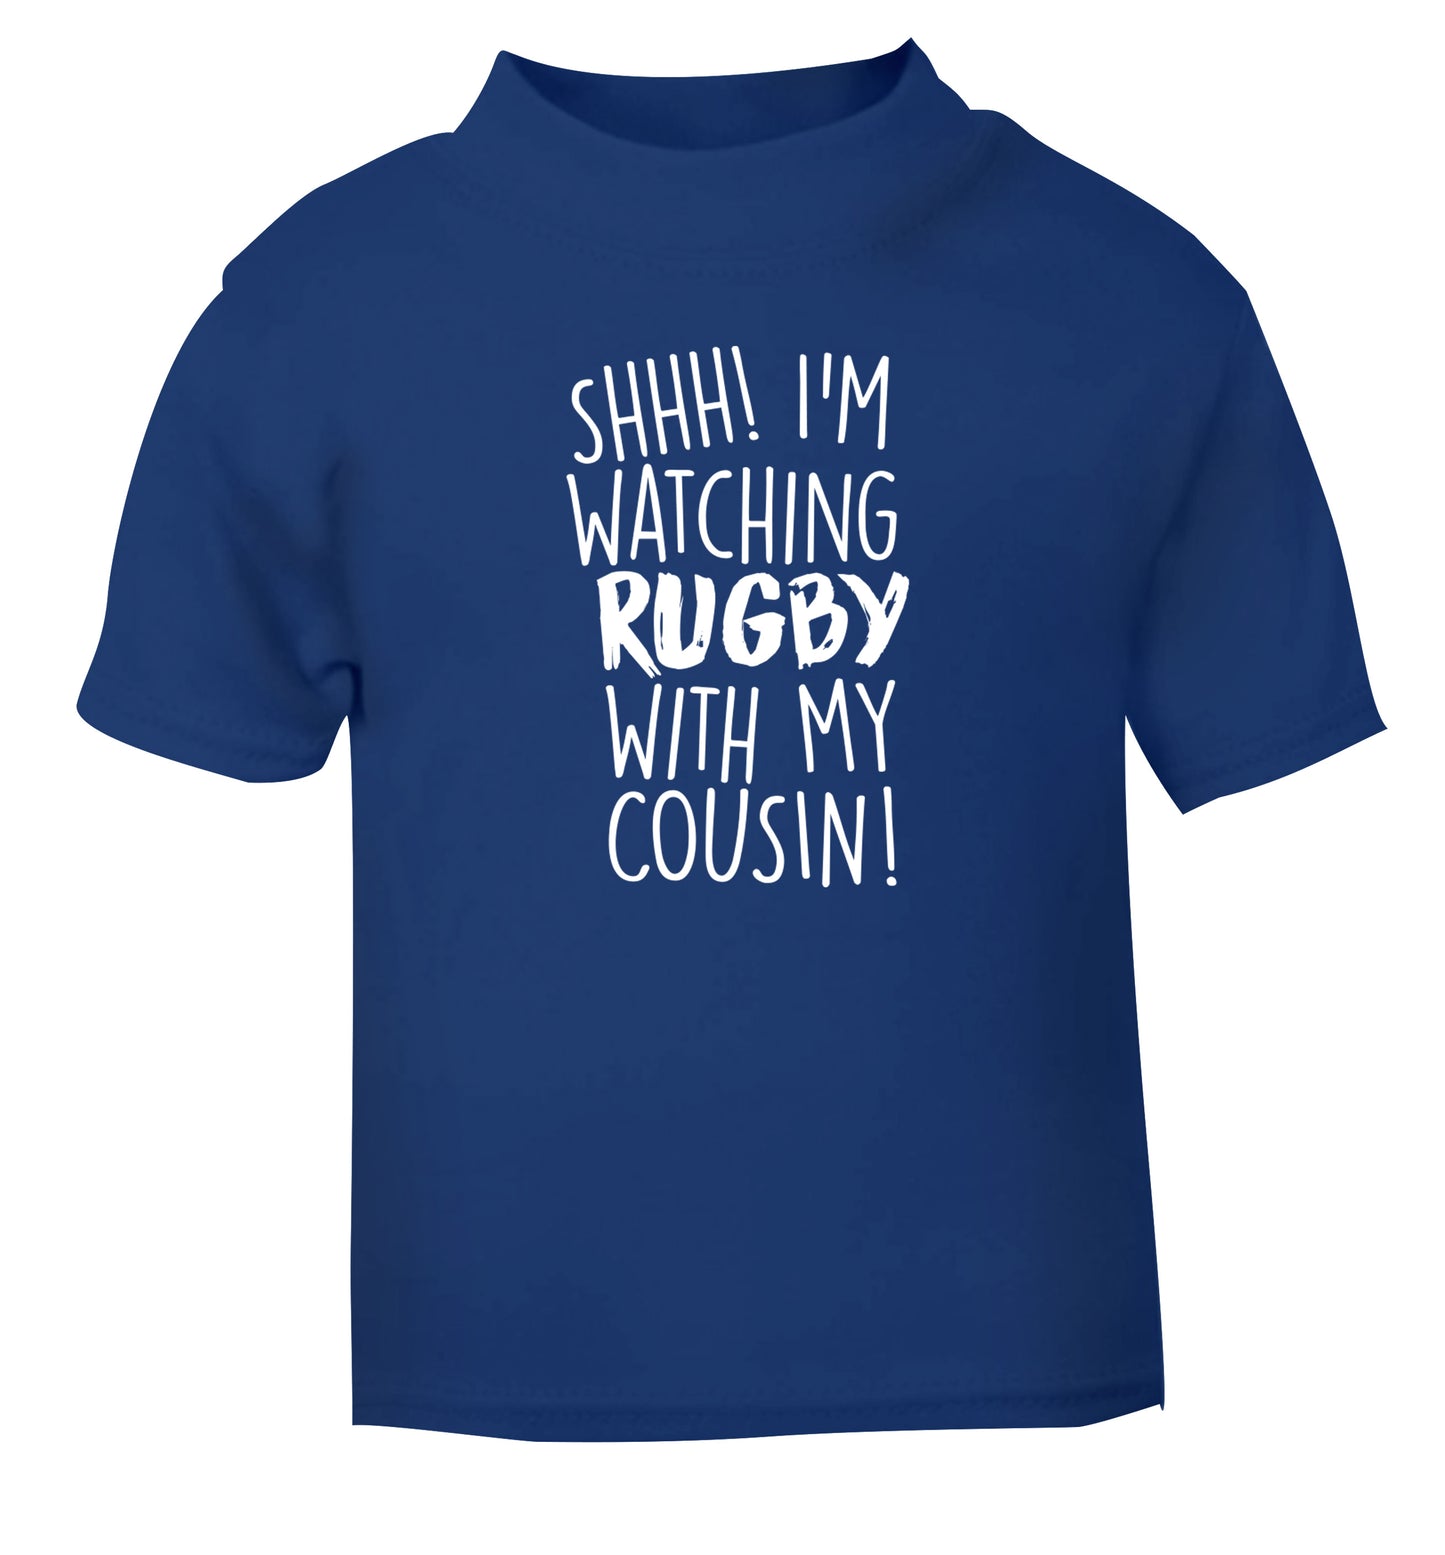 Shhh I'm watching rugby with my cousin blue Baby Toddler Tshirt 2 Years